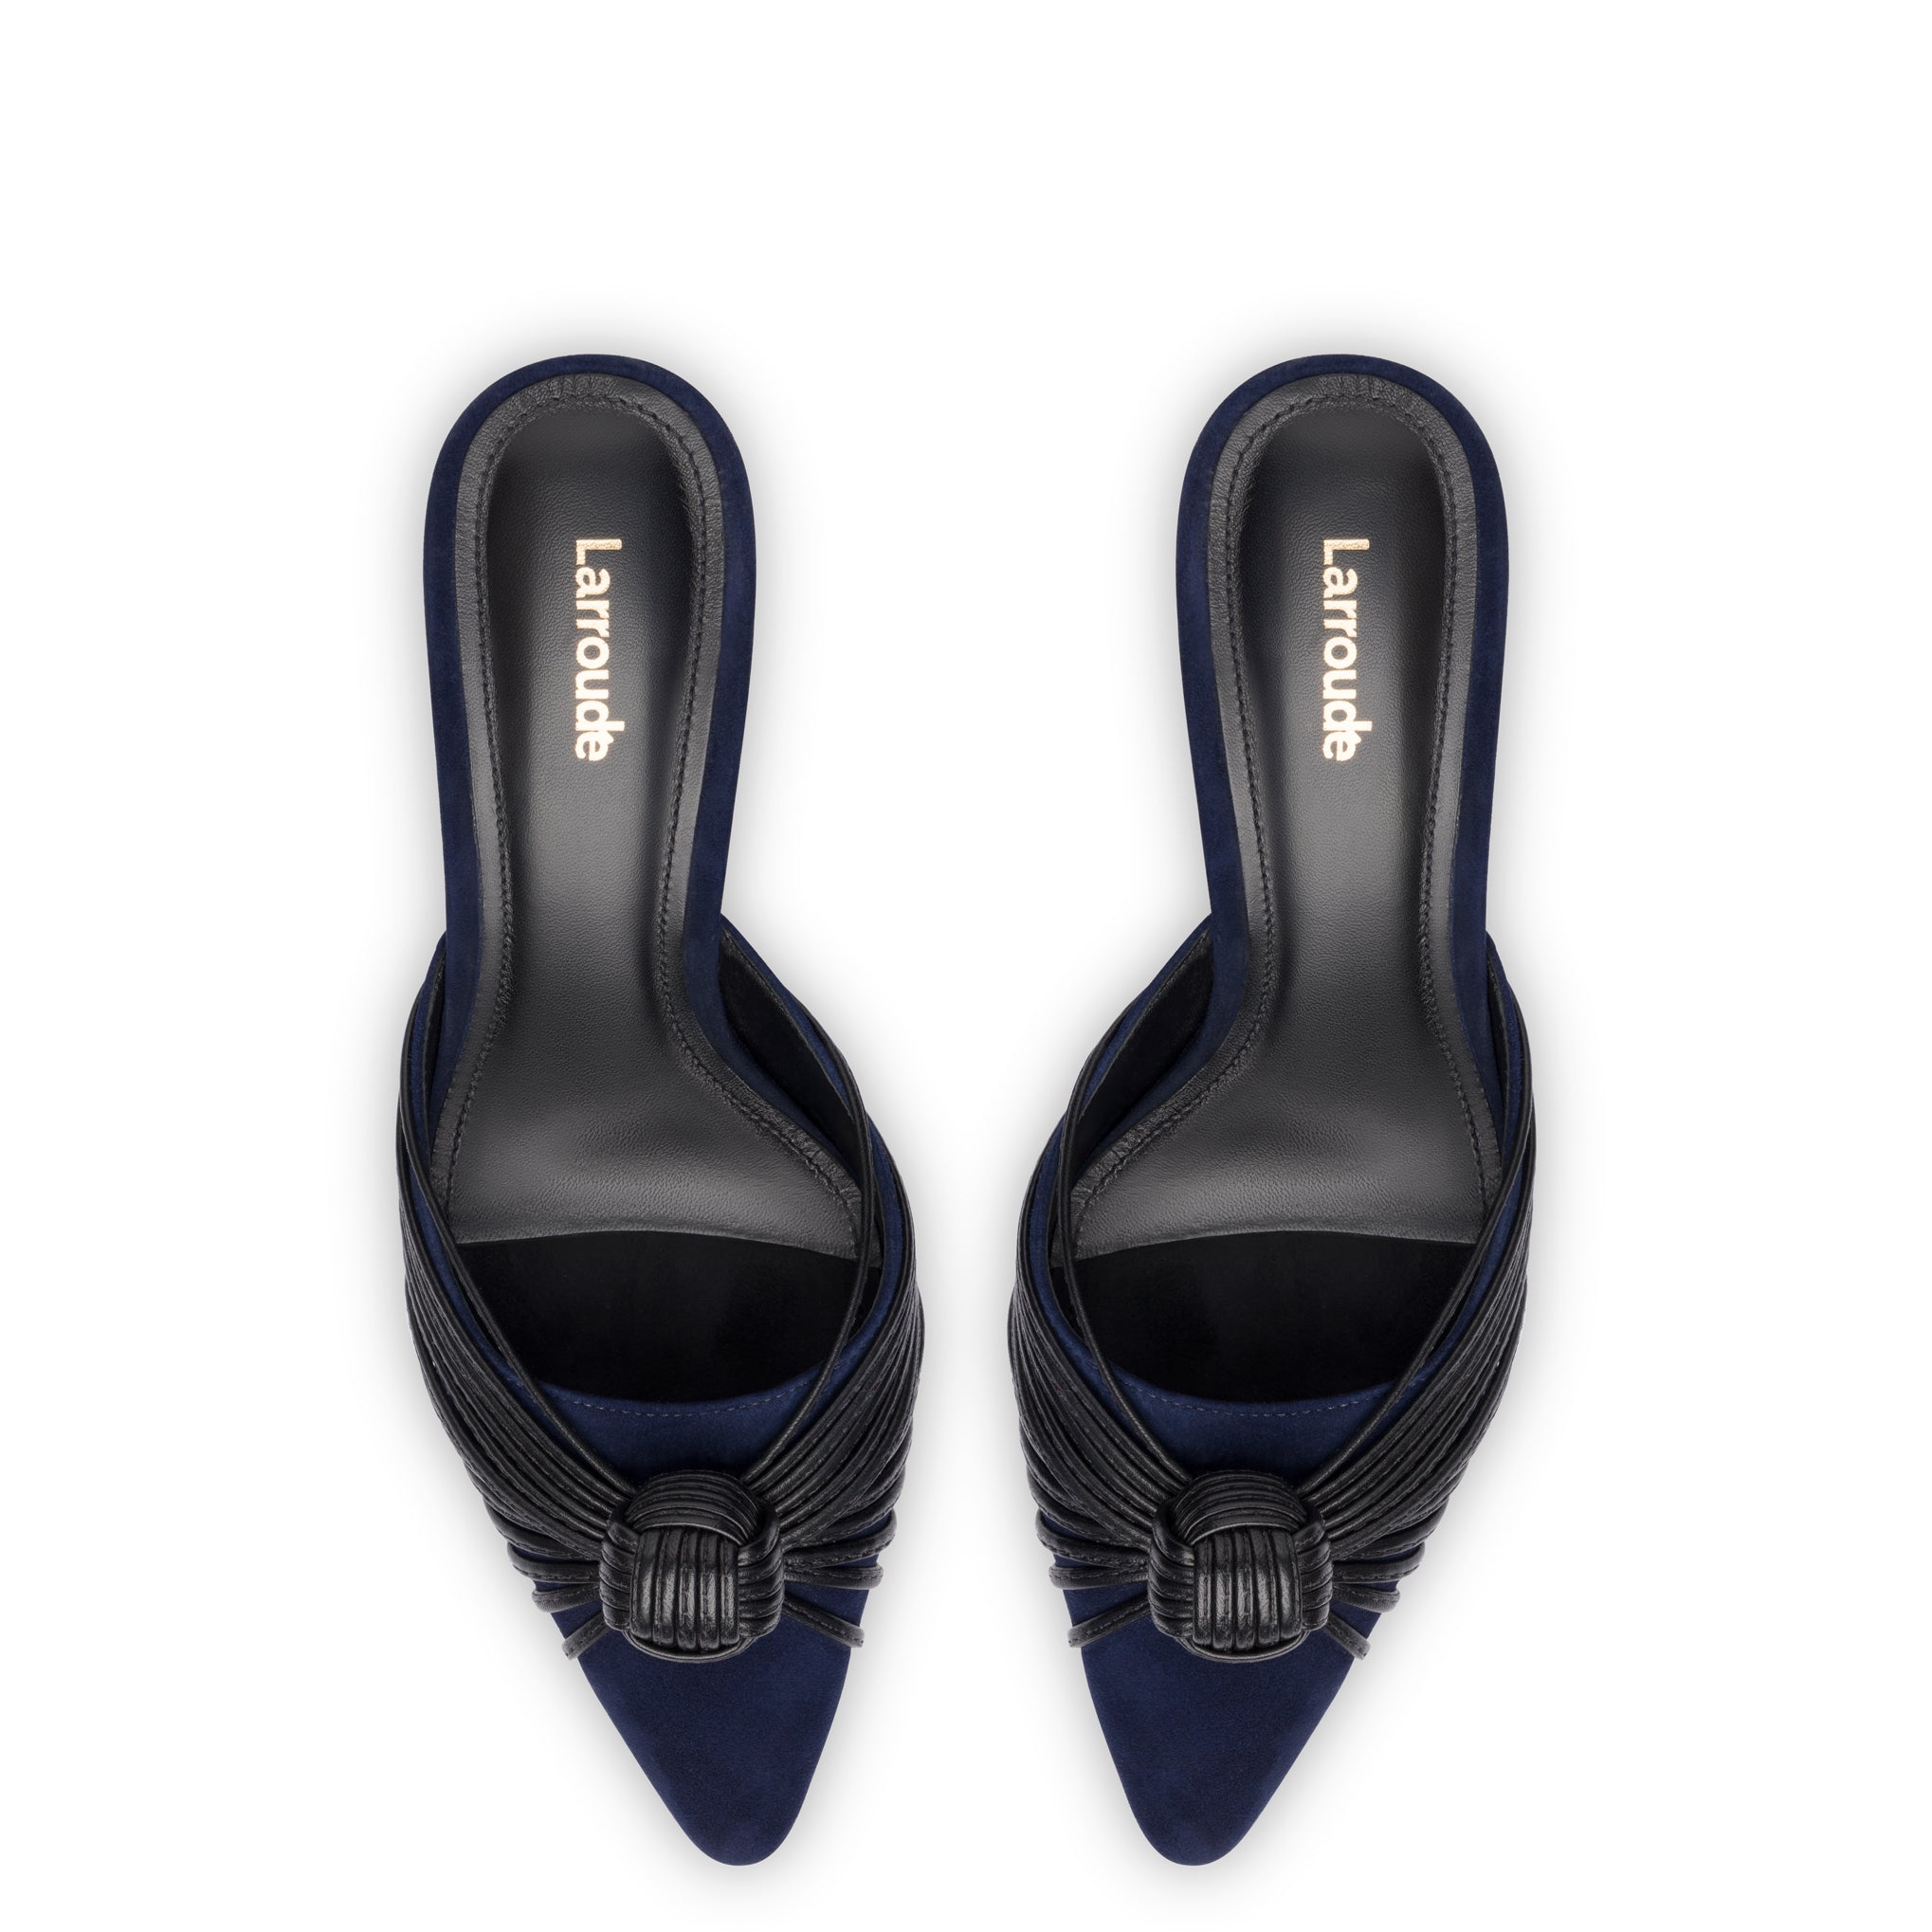 Mini Valerie Pump In Navy Suede and Black Leather